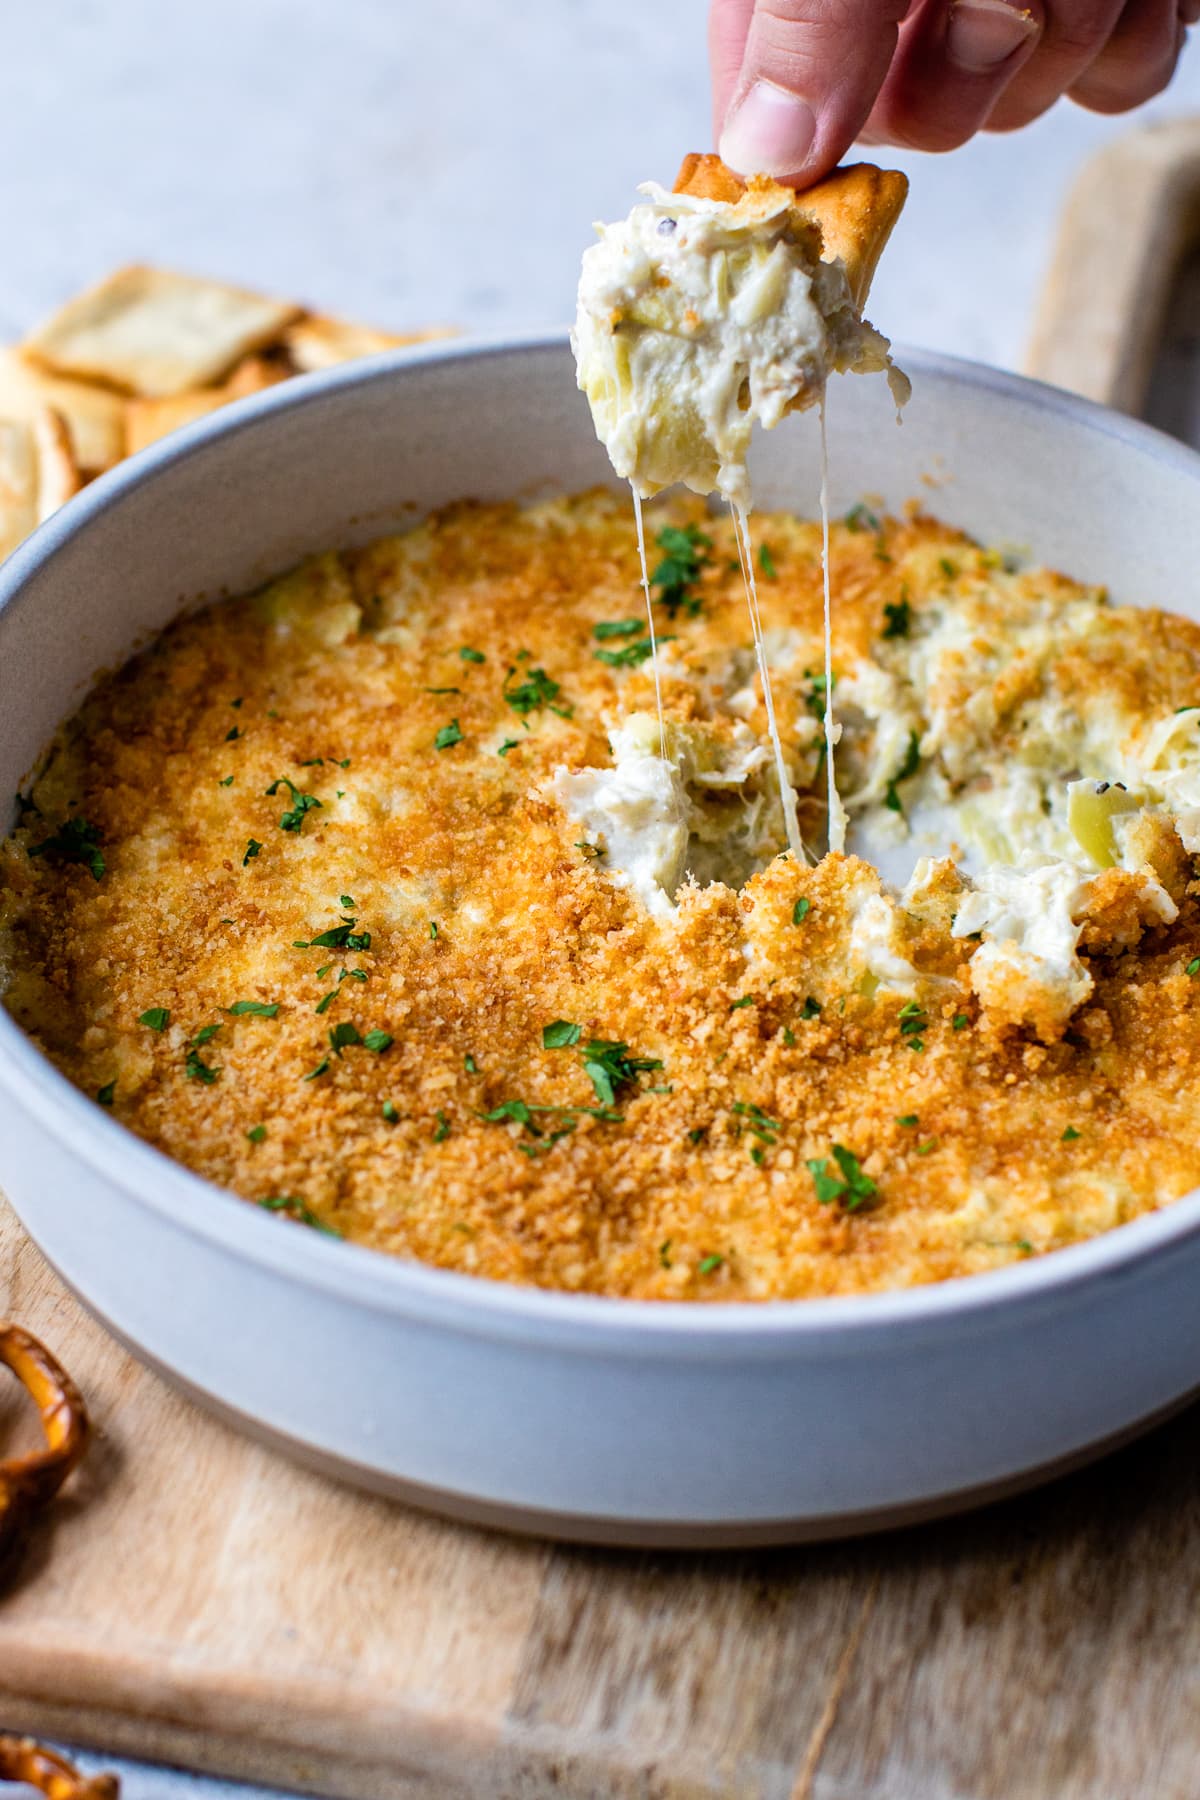 Hot Artichoke Dip with chips